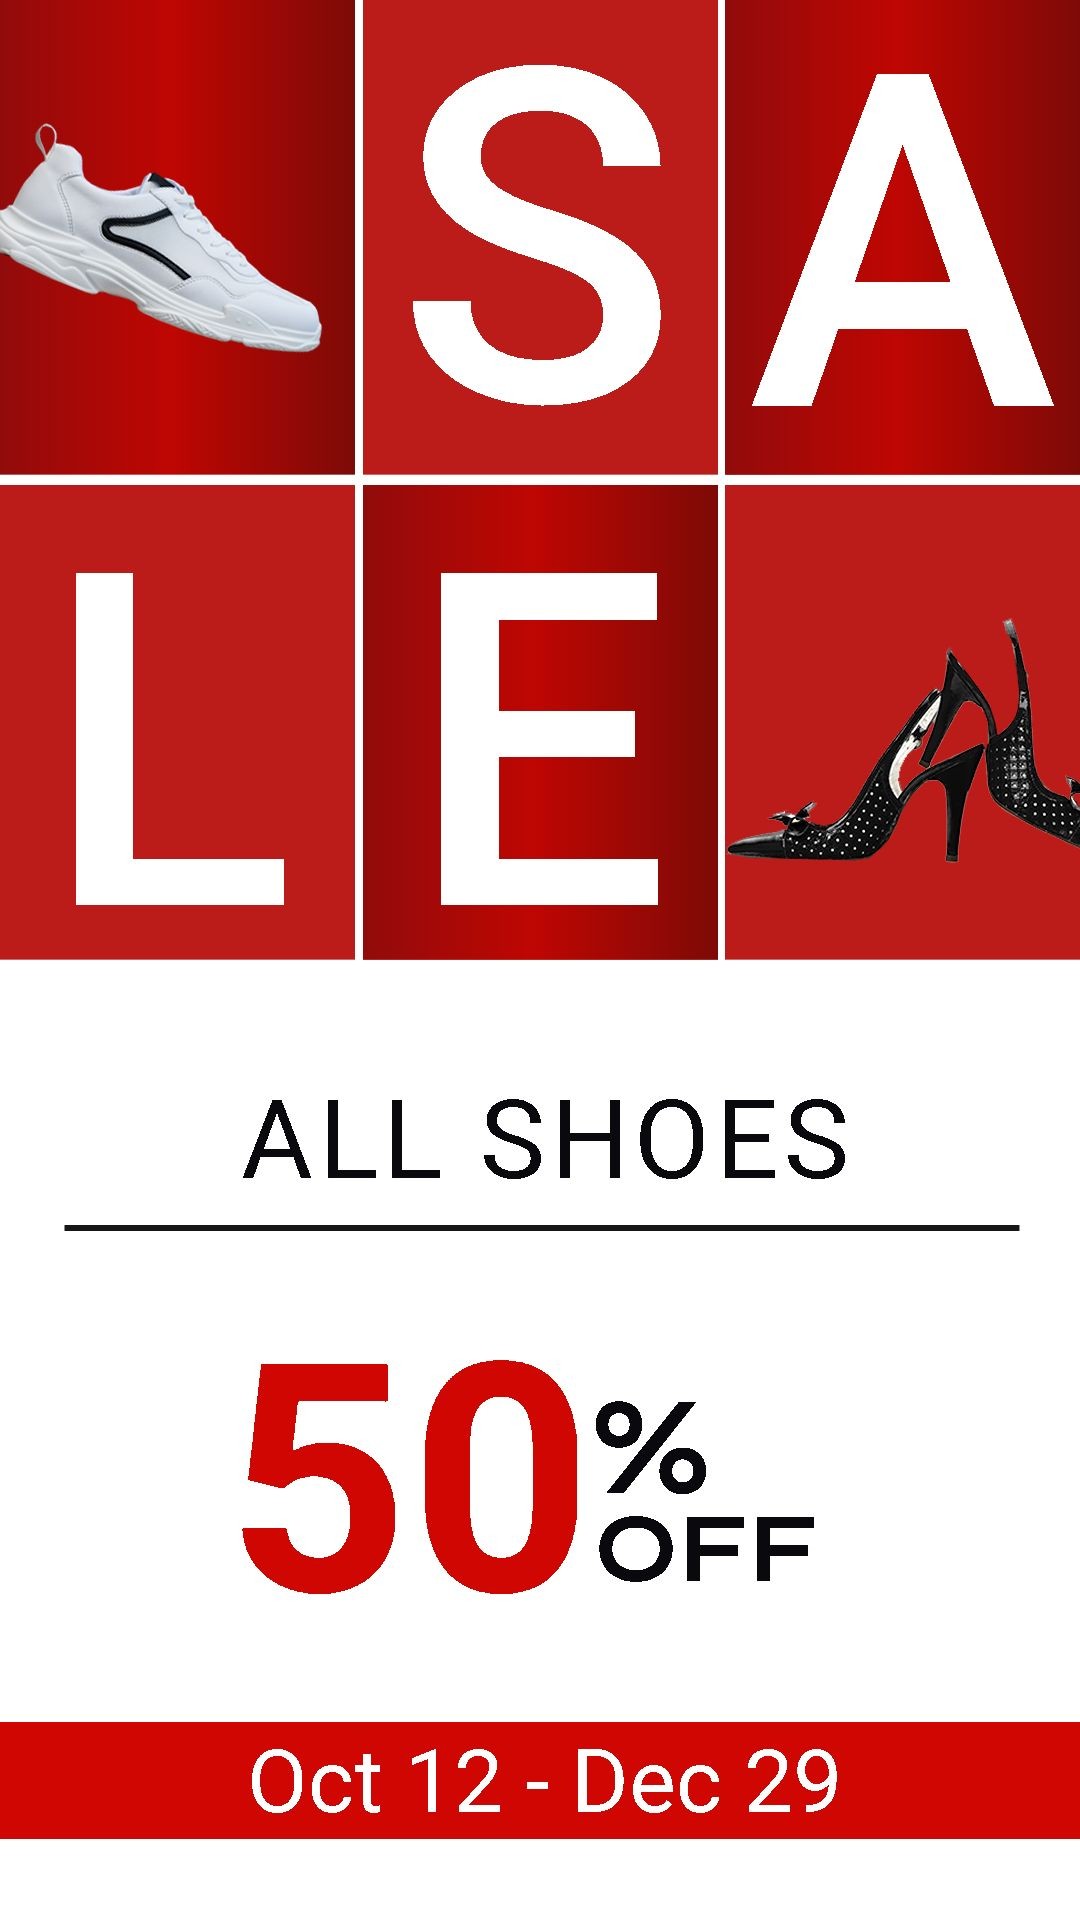 Men's Sports Shoes and Women's High Heels Fashion Sale Promo Ecommerce Story